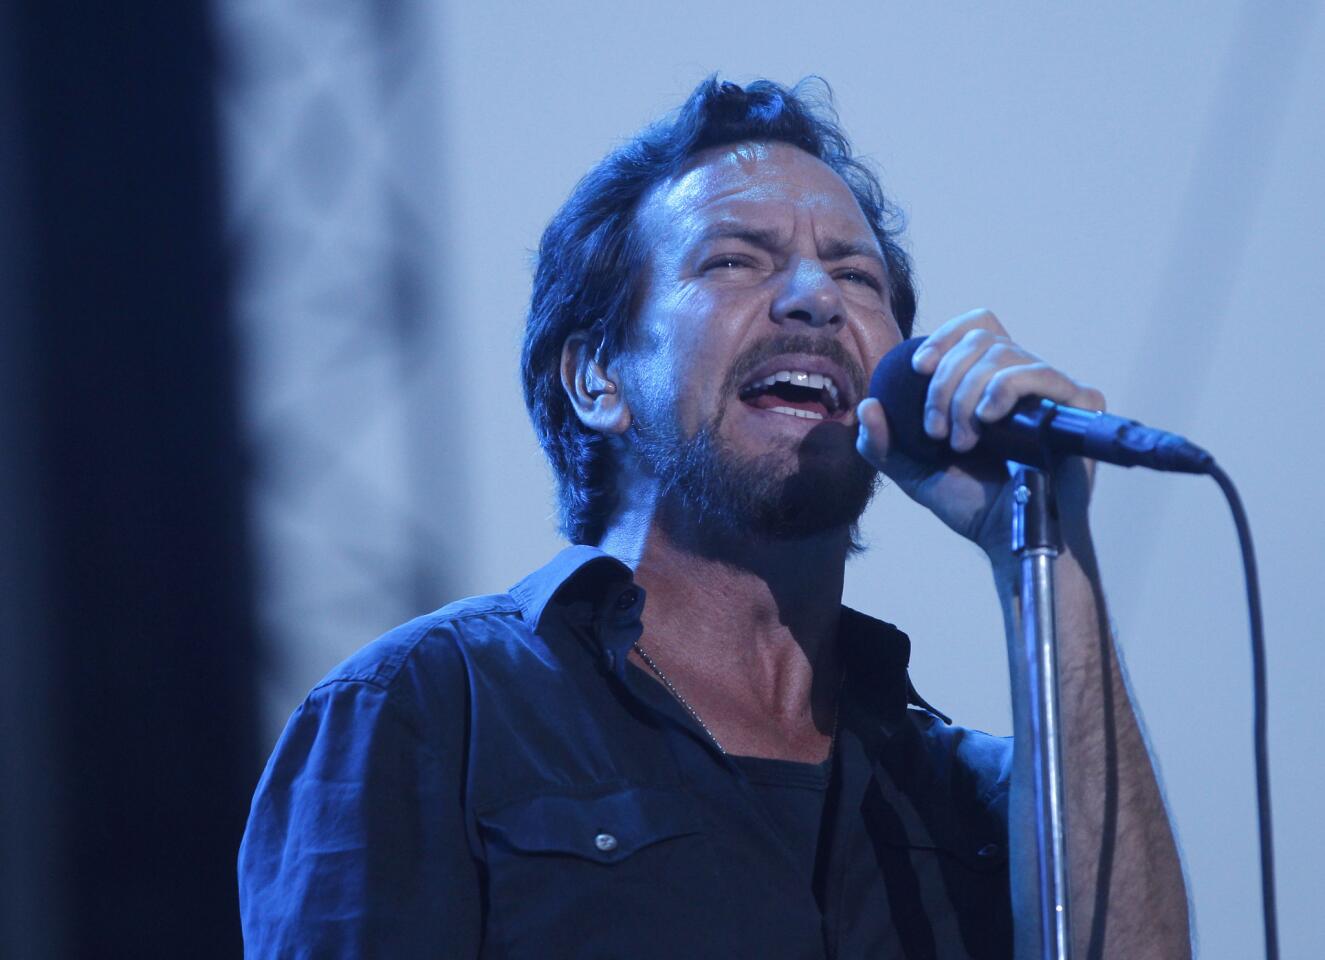 Pearl Jam has a new album, "Lightning Bolt," scheduled for release in October.